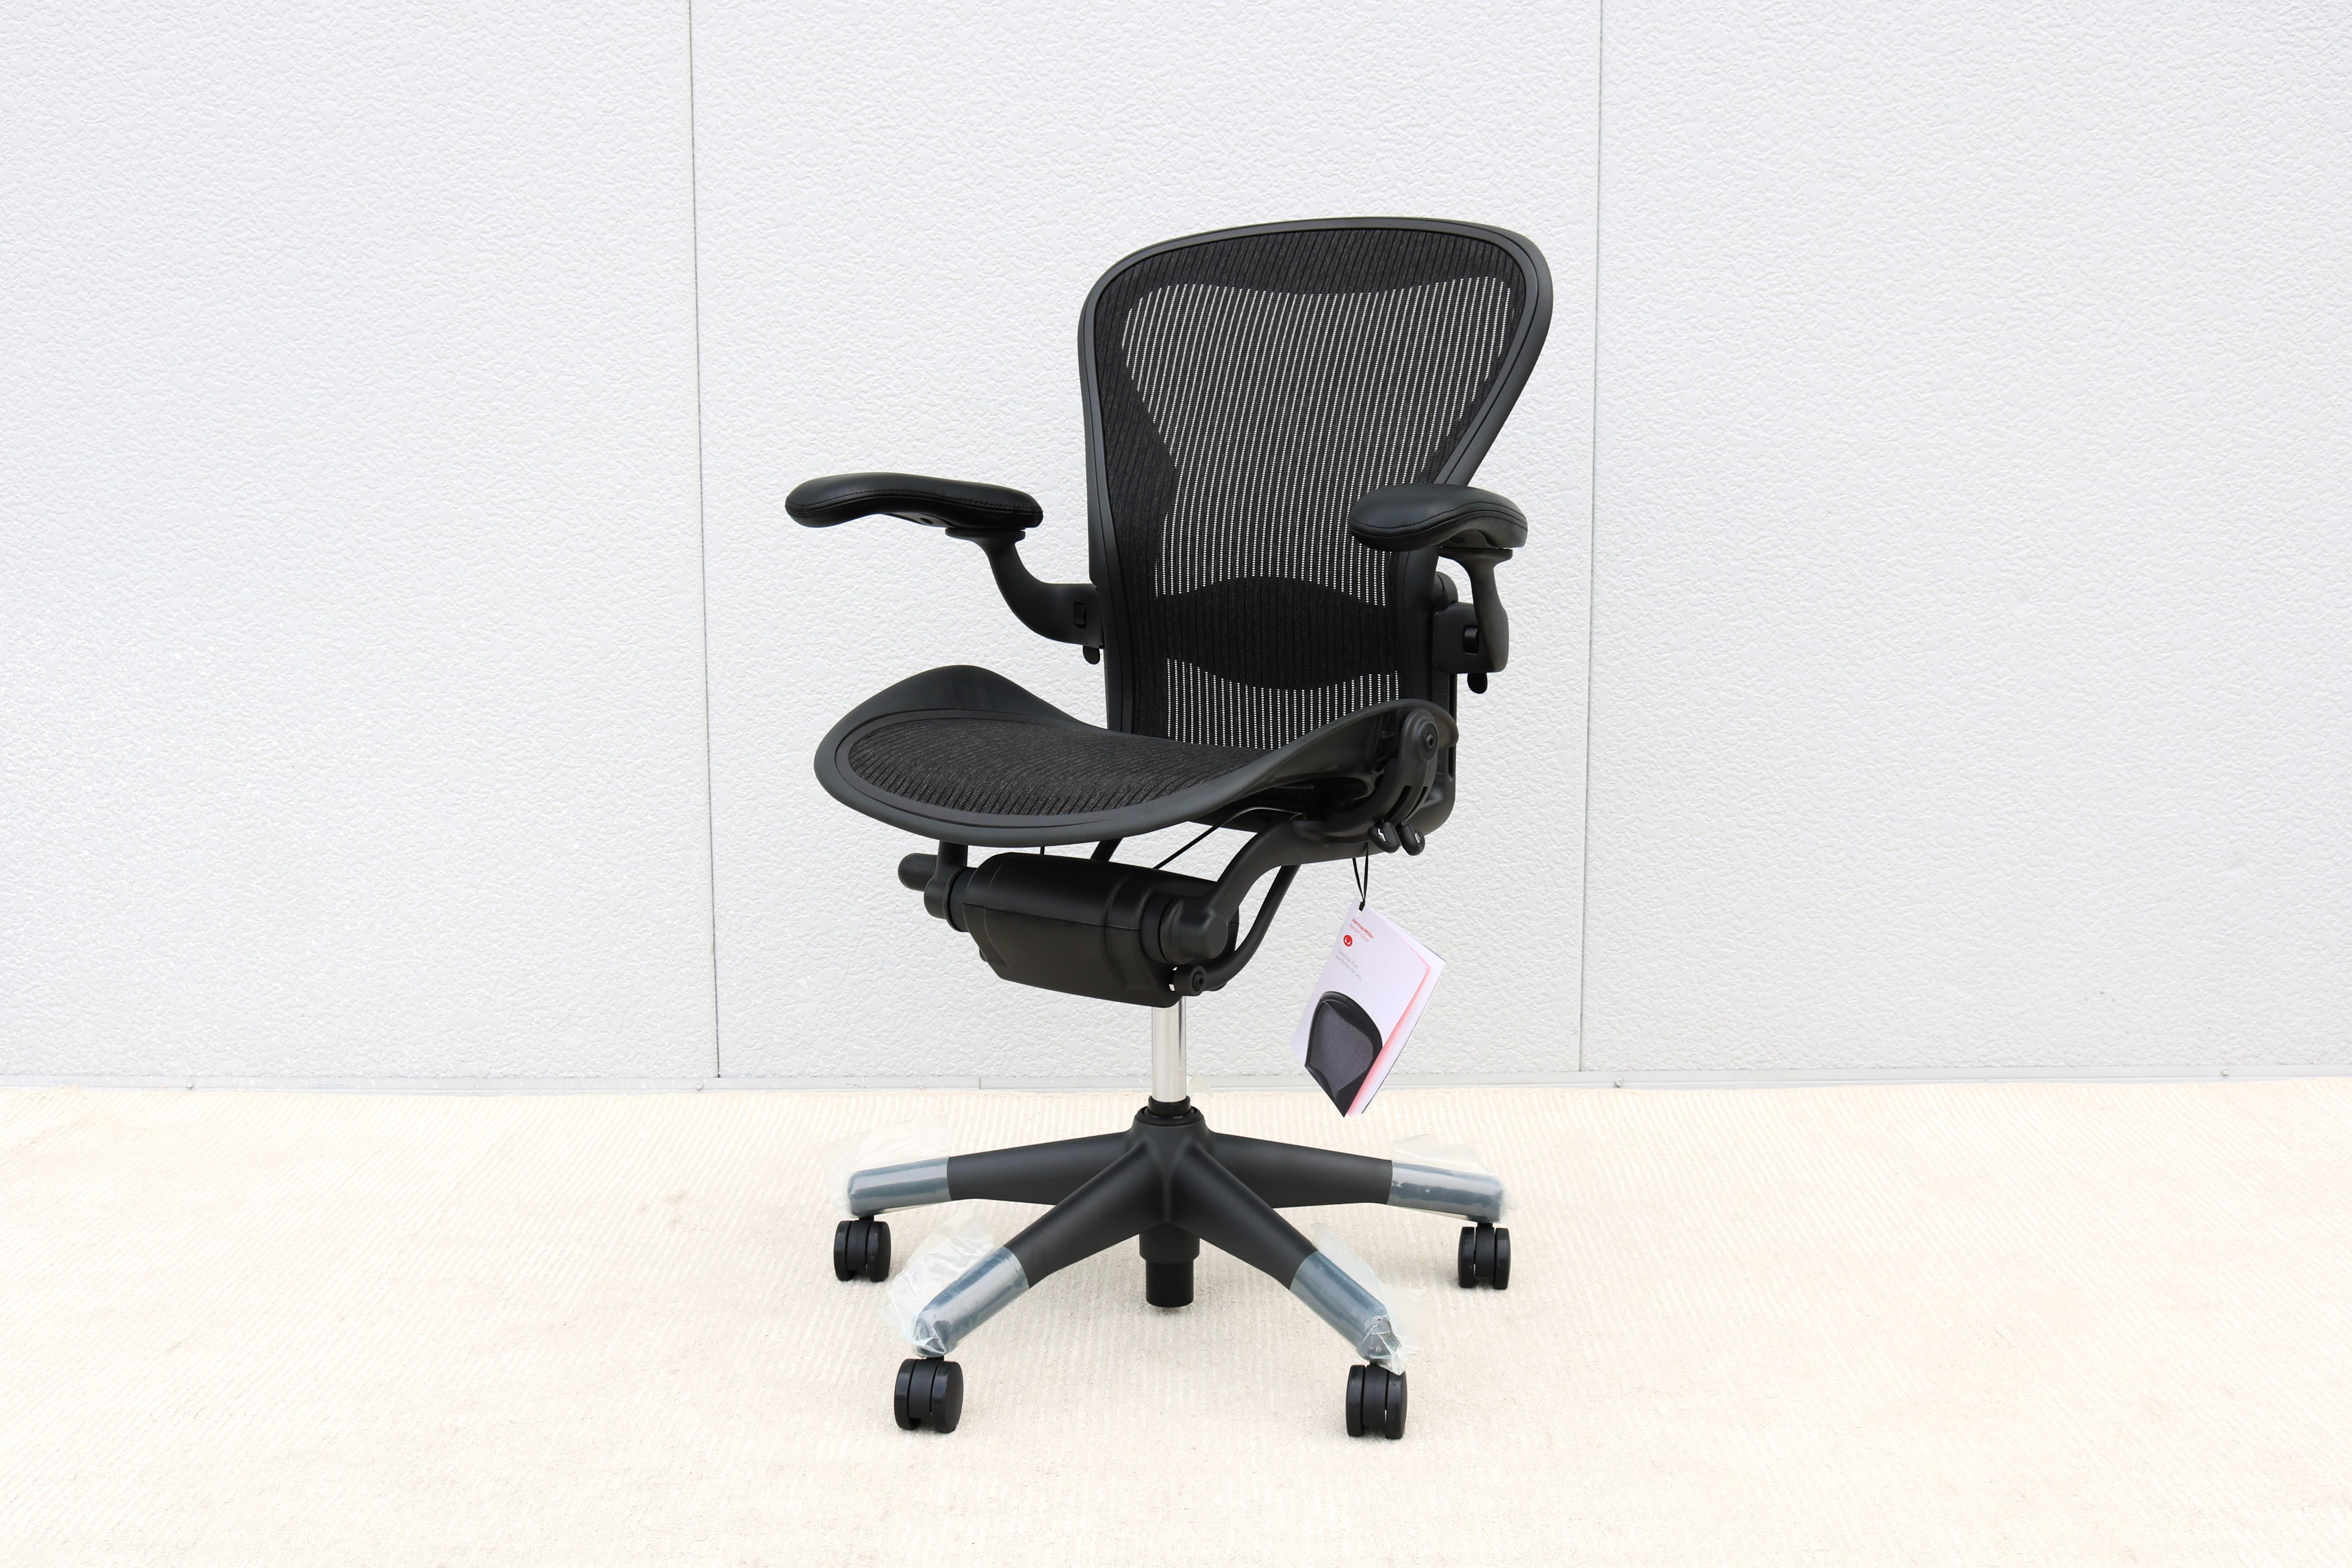 Aeron chair size (B) fully loaded with all adjustments by Herman Miller.
It's the best and most admired and recognized ergonomic office chair ever made.
Its innovative design and support for a range of postures, activities, and body types, have made